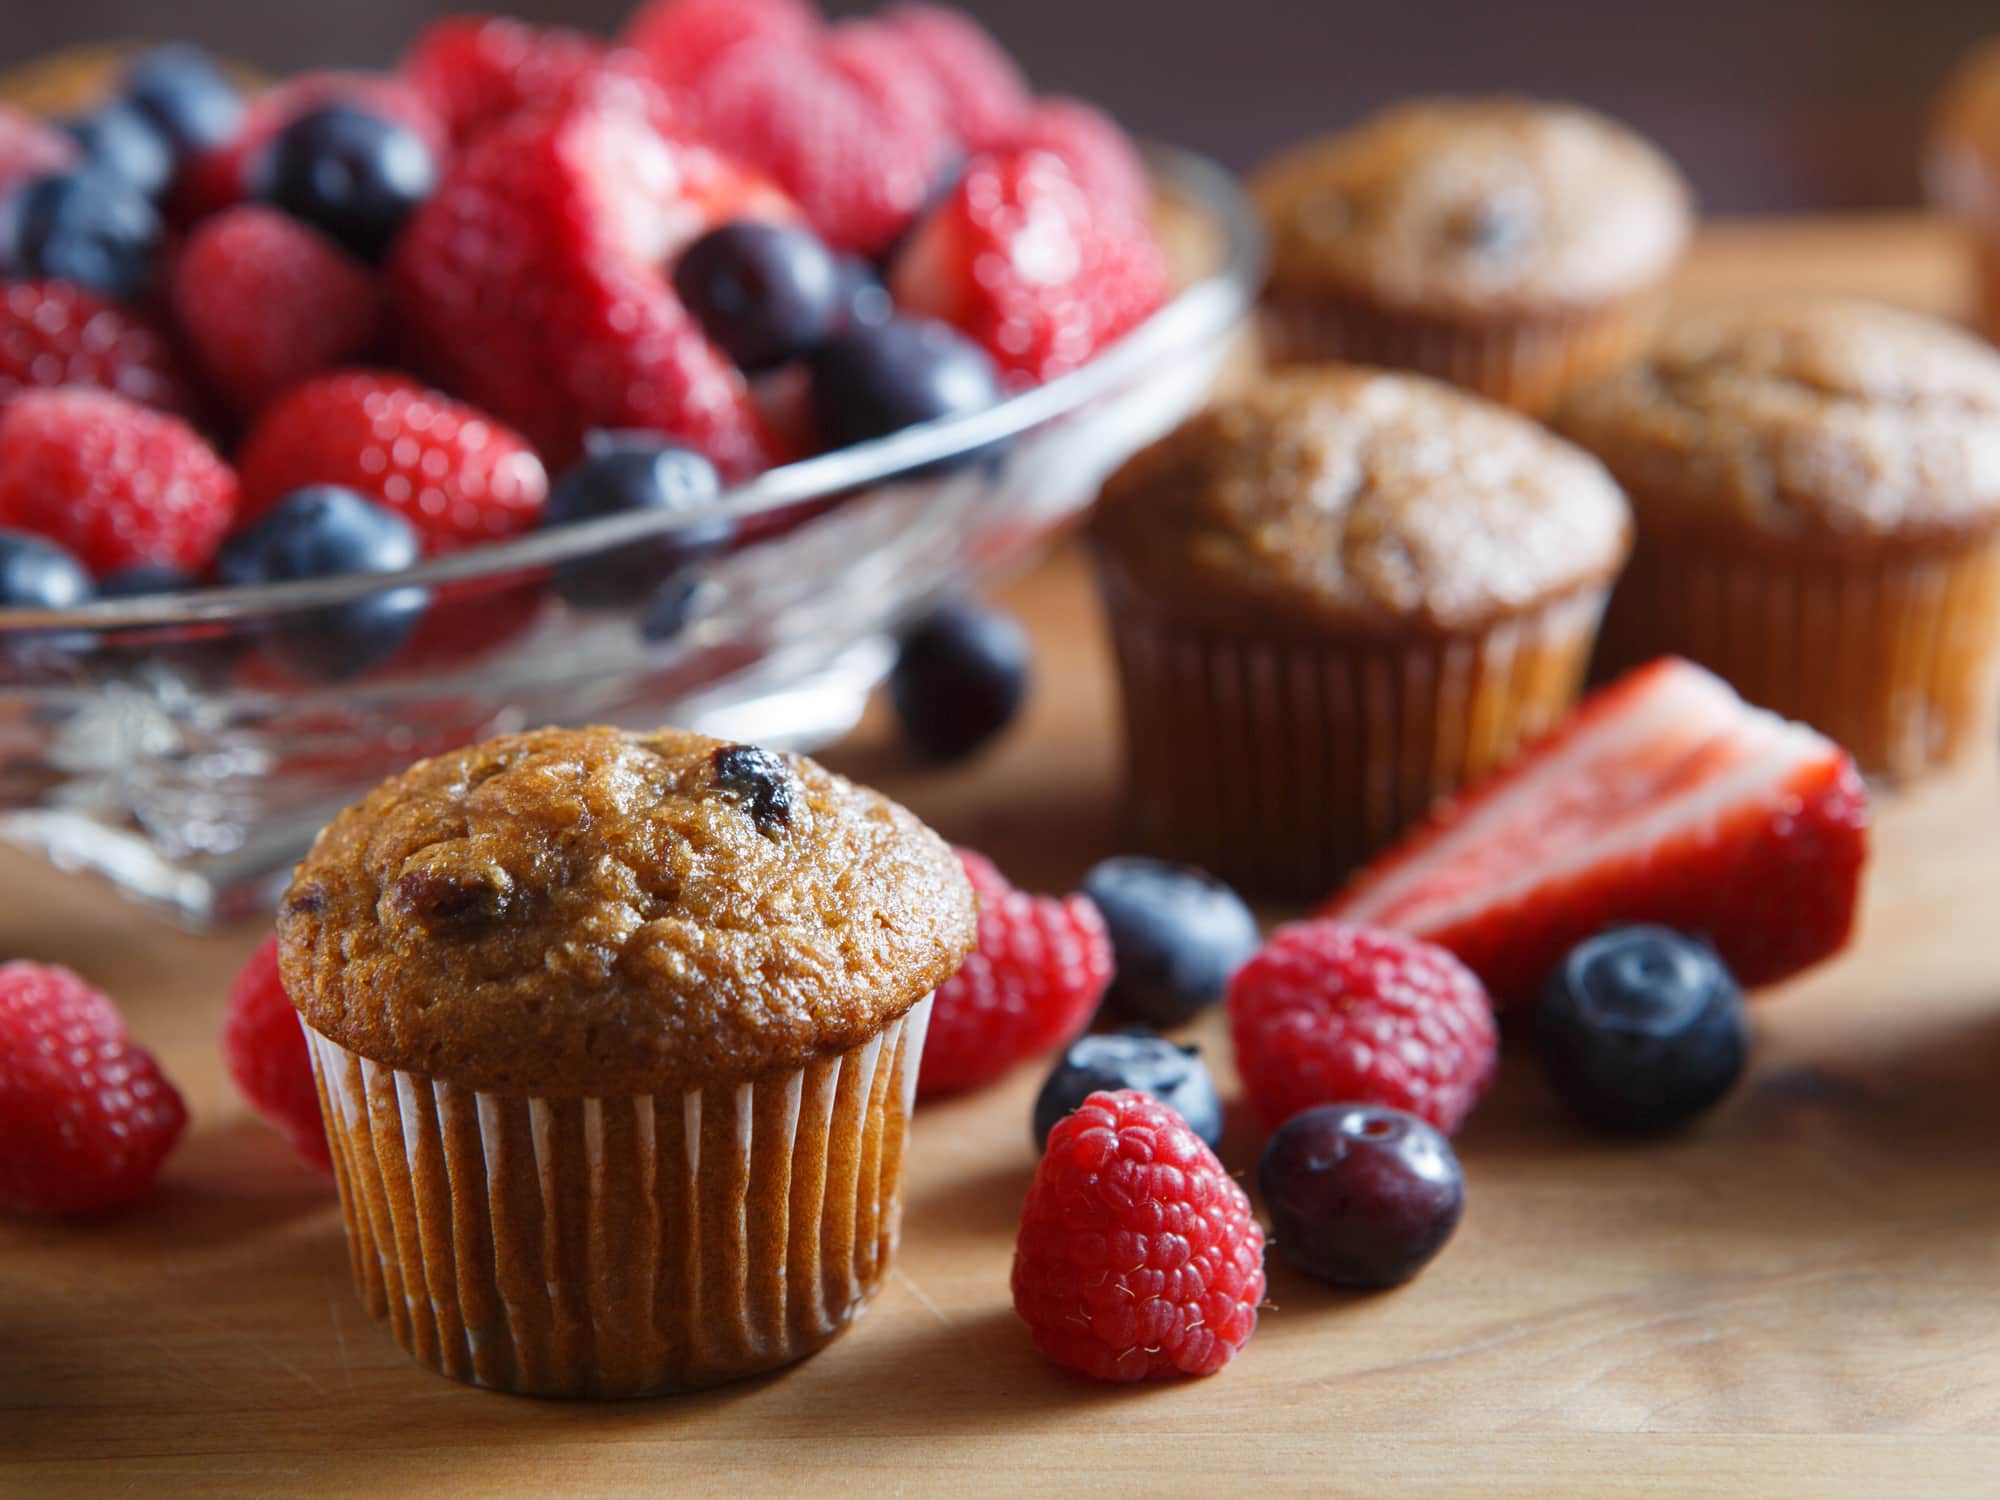 Blueberry Muffins with fresh raspberries, strawberries, blueberries on a wooden cutting board.